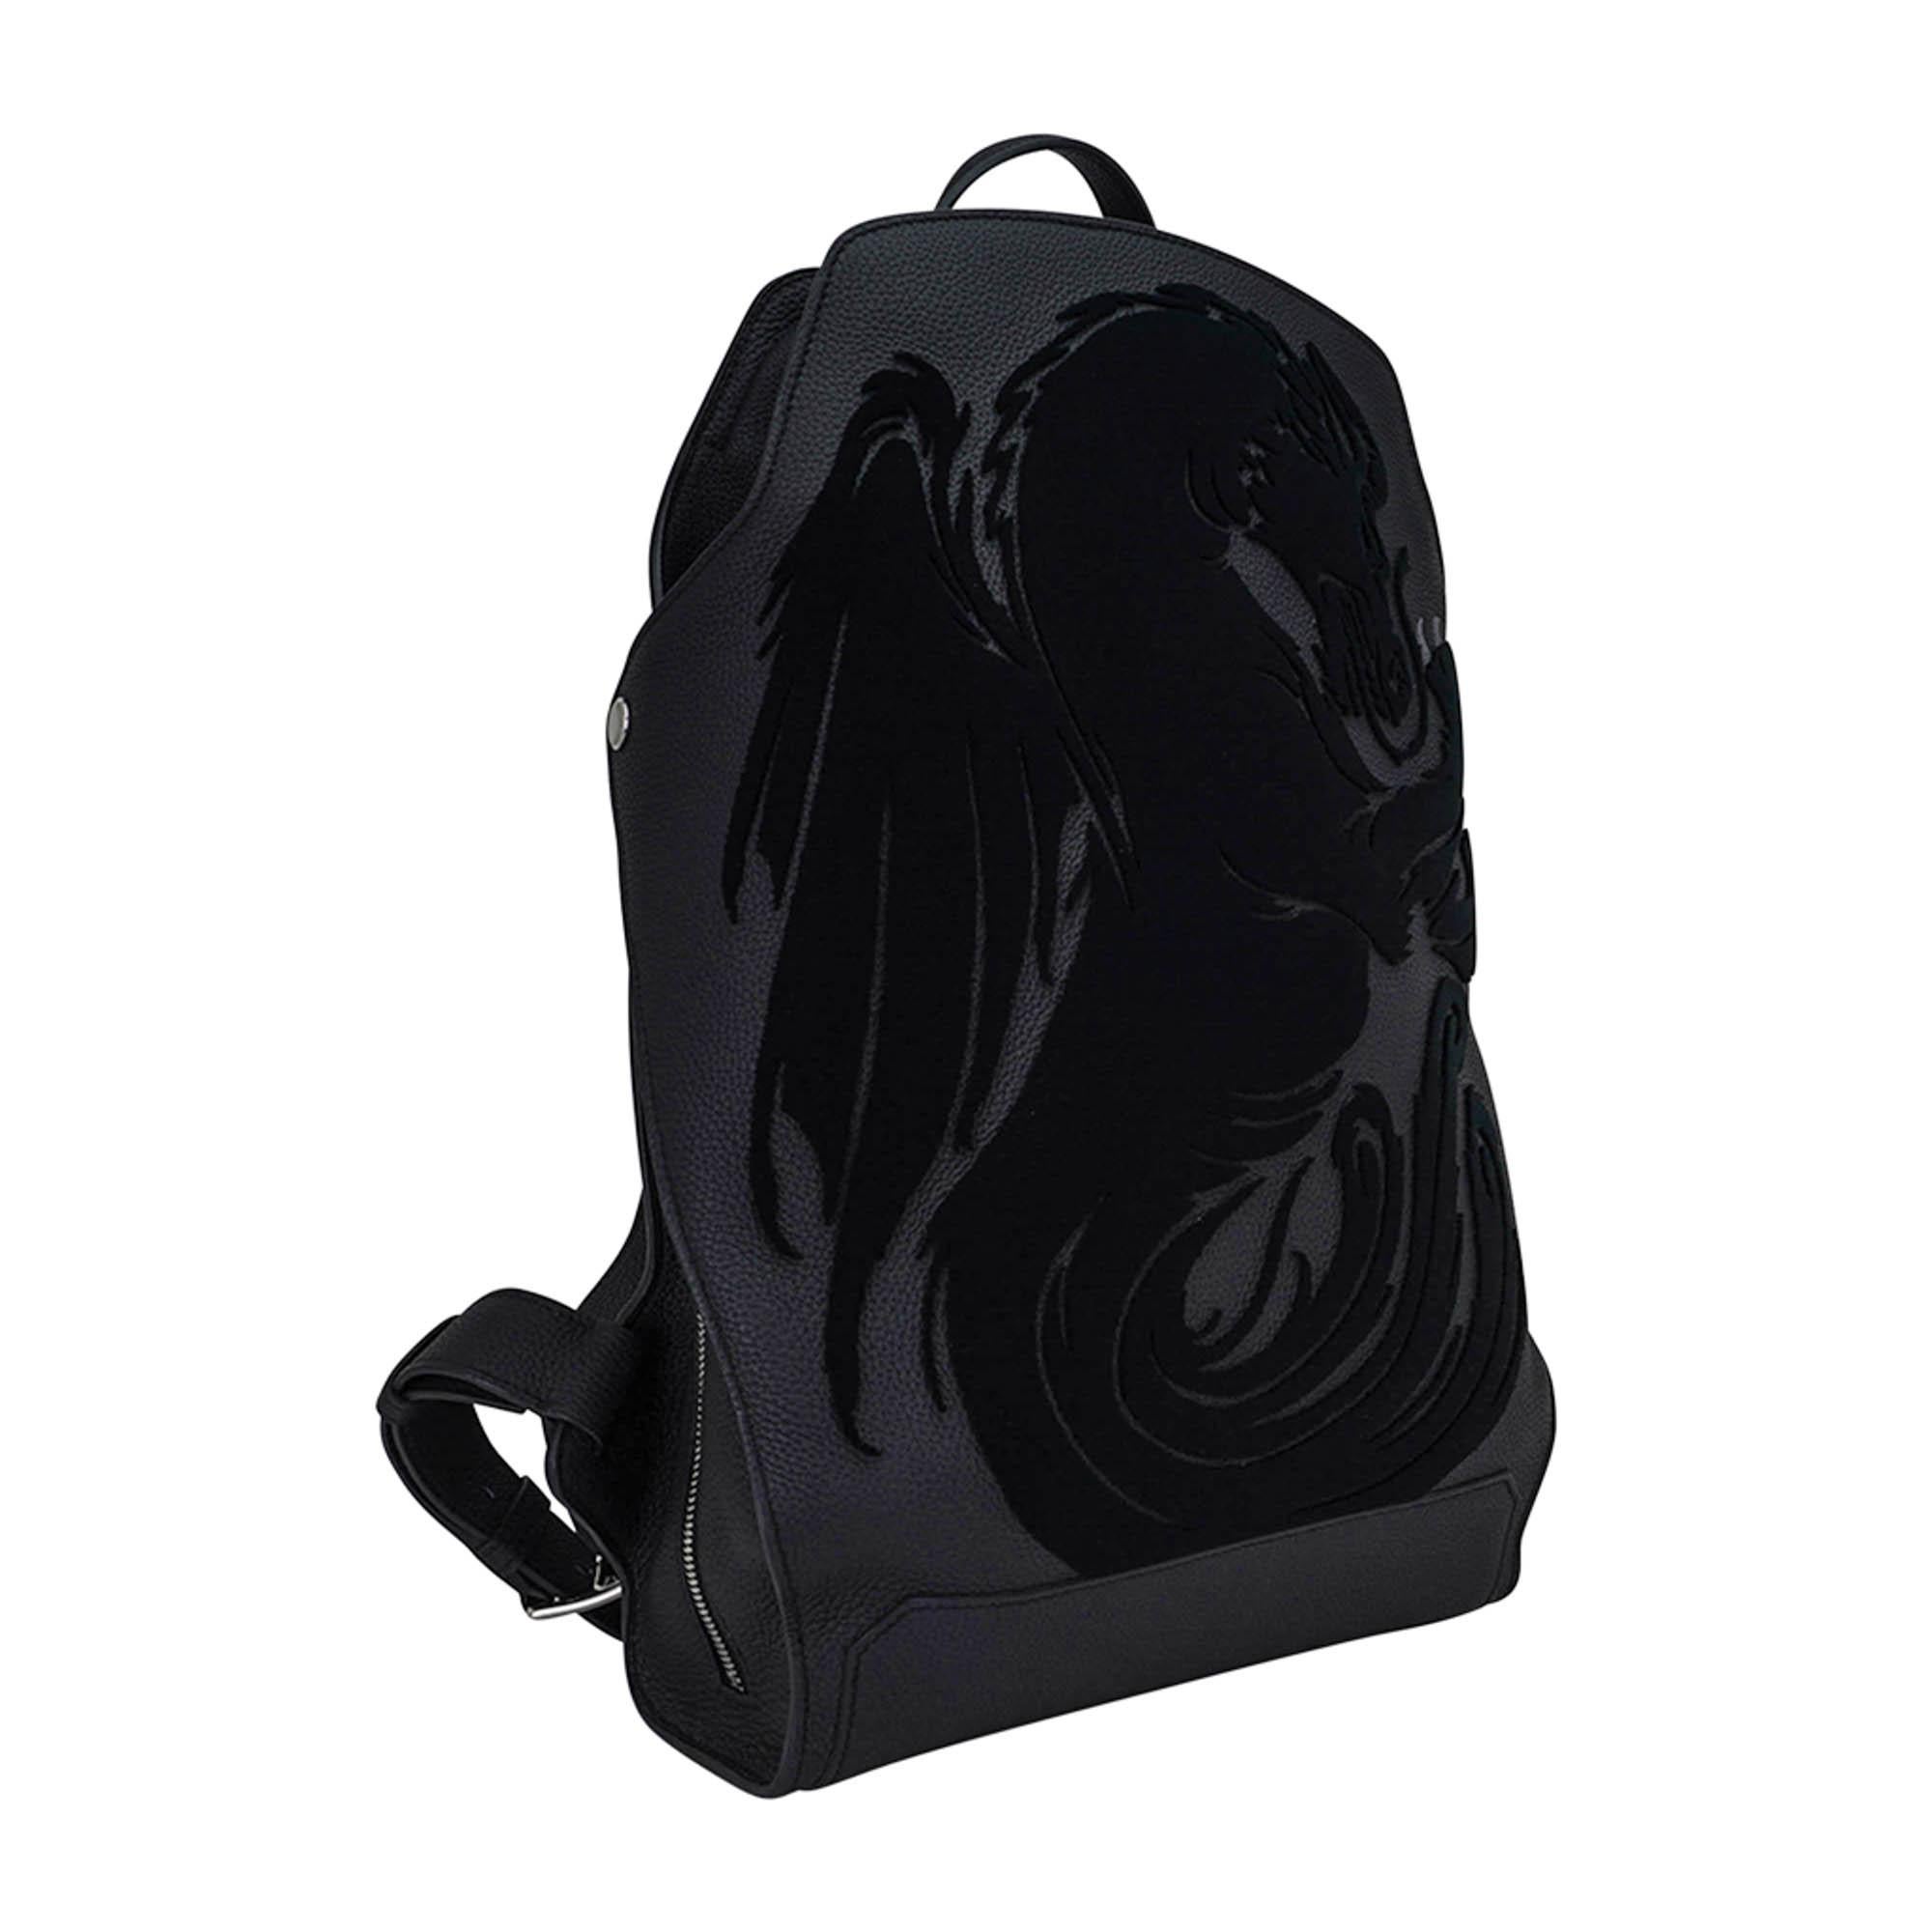 Limited Edition Hermes Chimeres Cityback 27 backpack featured in Black Togo leather.
A beautifully crafted Greek mythological chimera dragon appears at rear.
Velvety to the eye and to the touch, the creature is directly embroidered on the leather